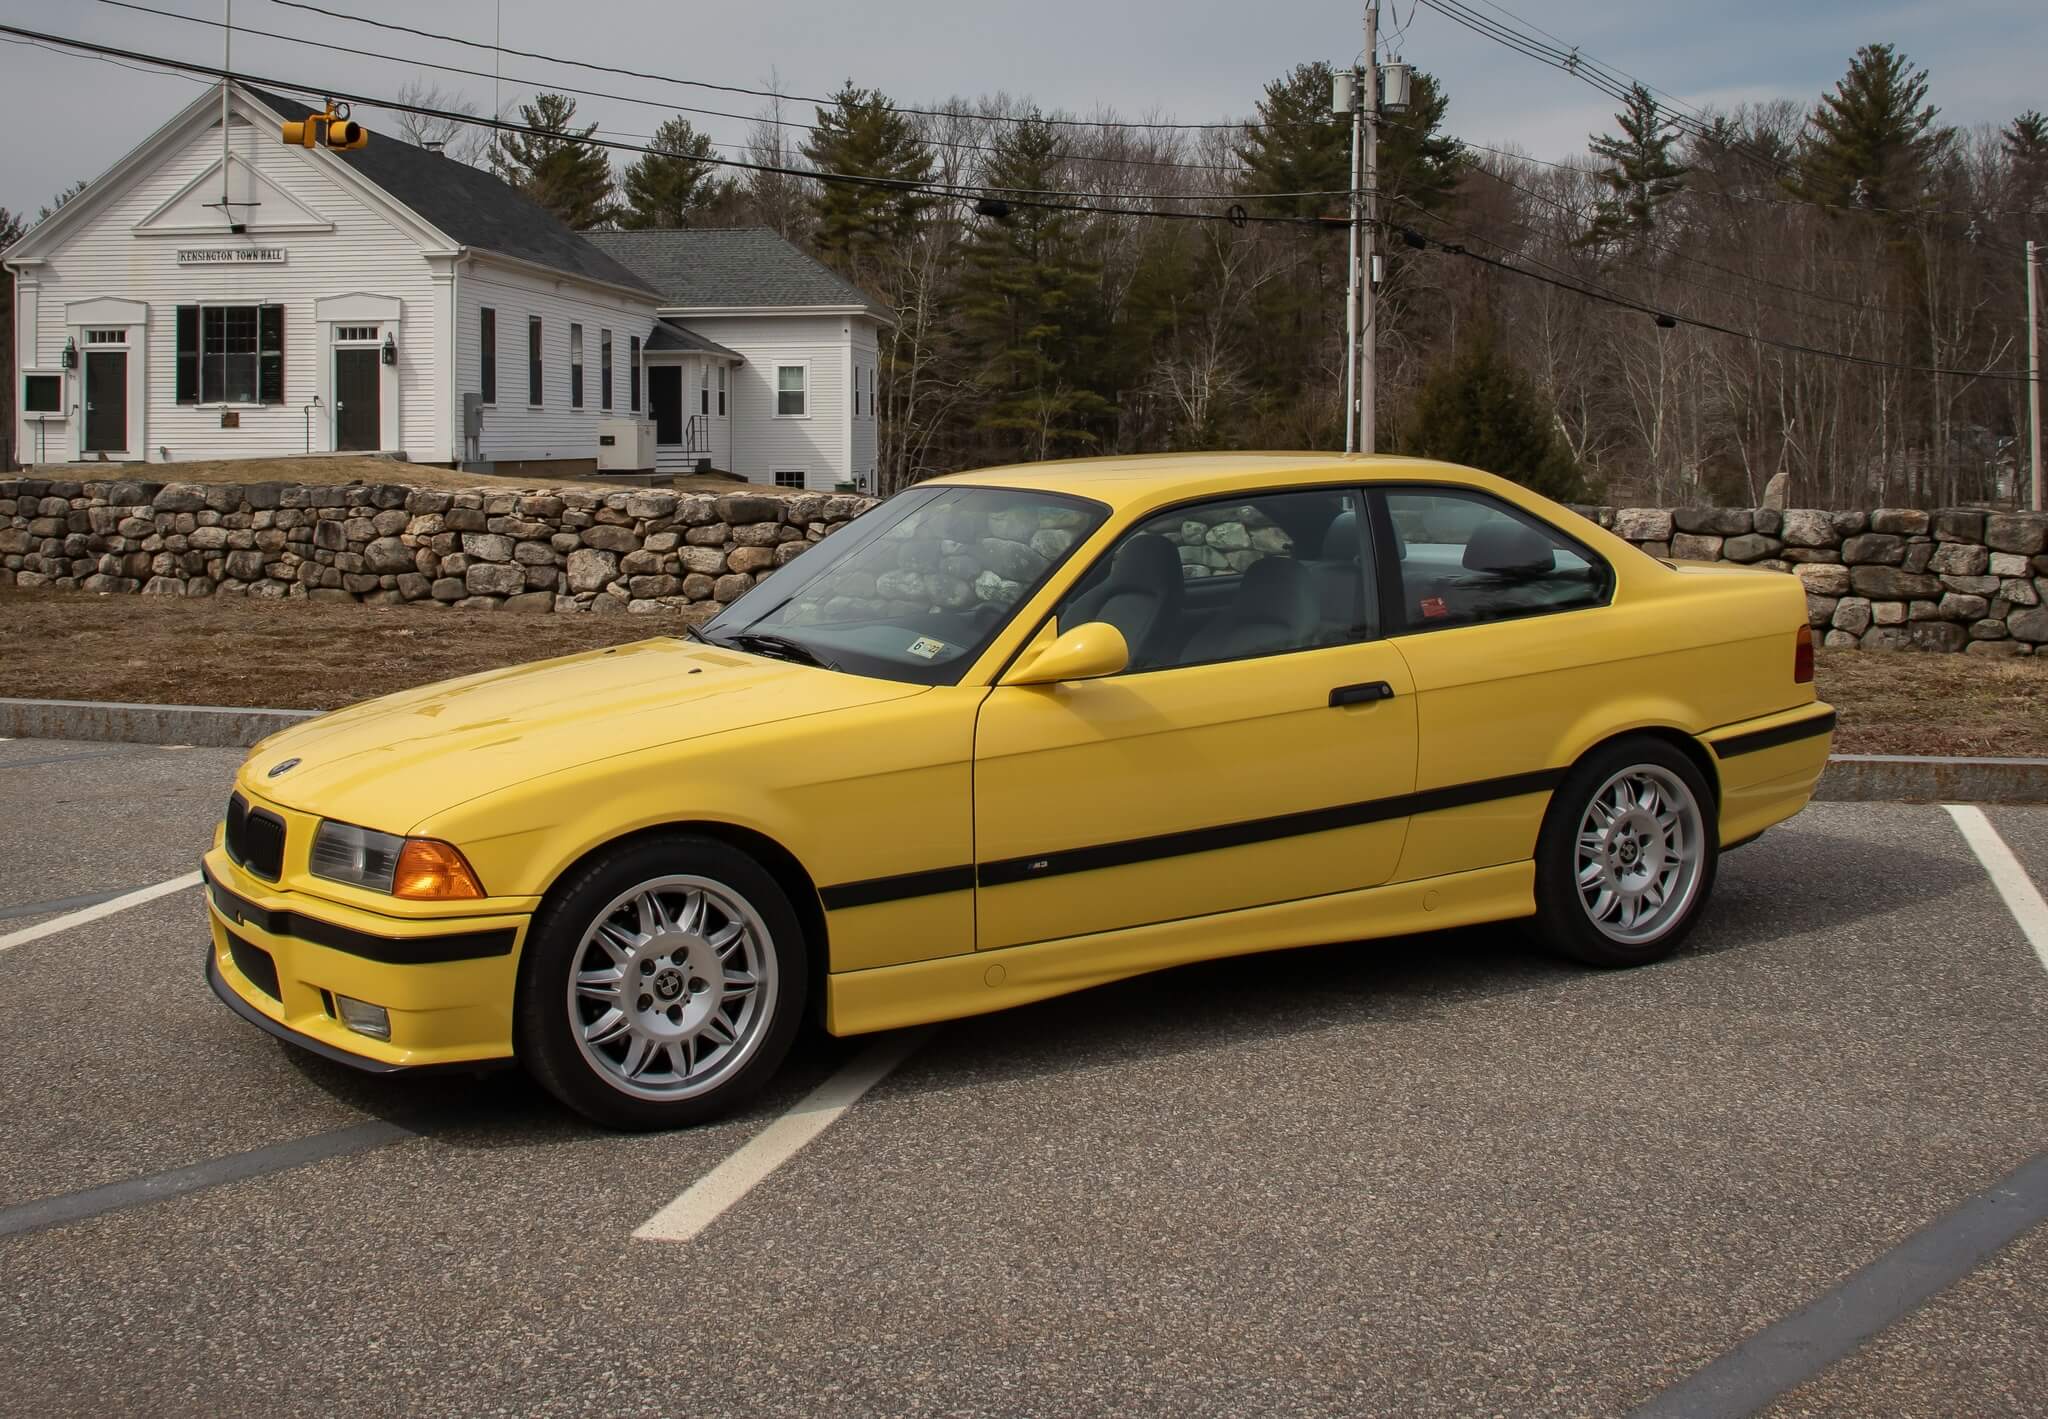 BMW E36 with pop-up headlights!? Let us know your thoughts